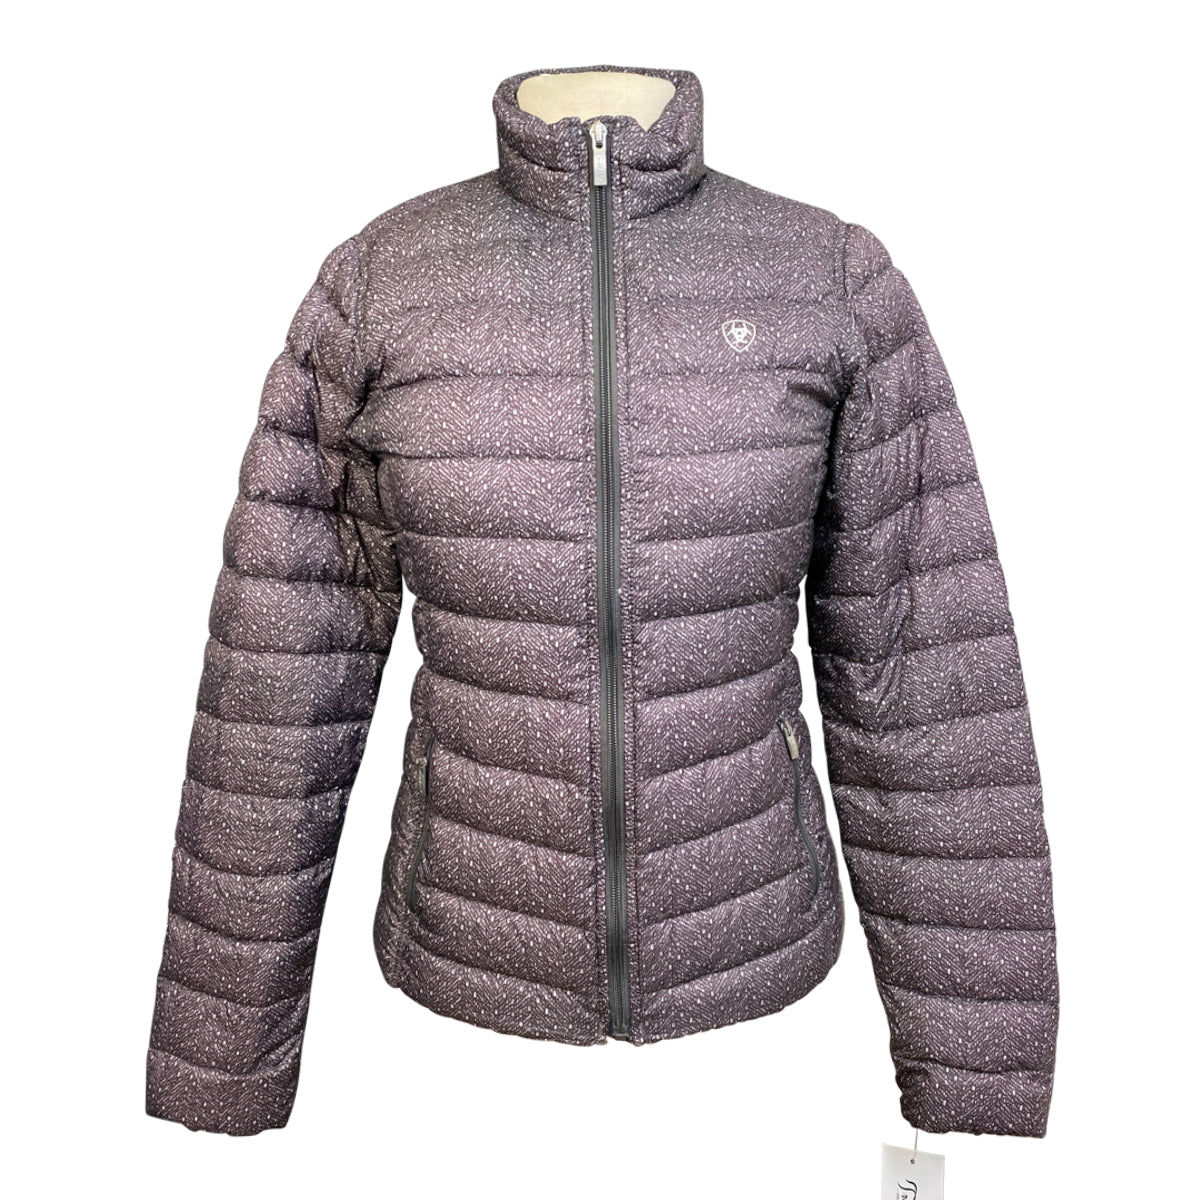 Ariat Ideal Down Jacket in Grey/White Pattern